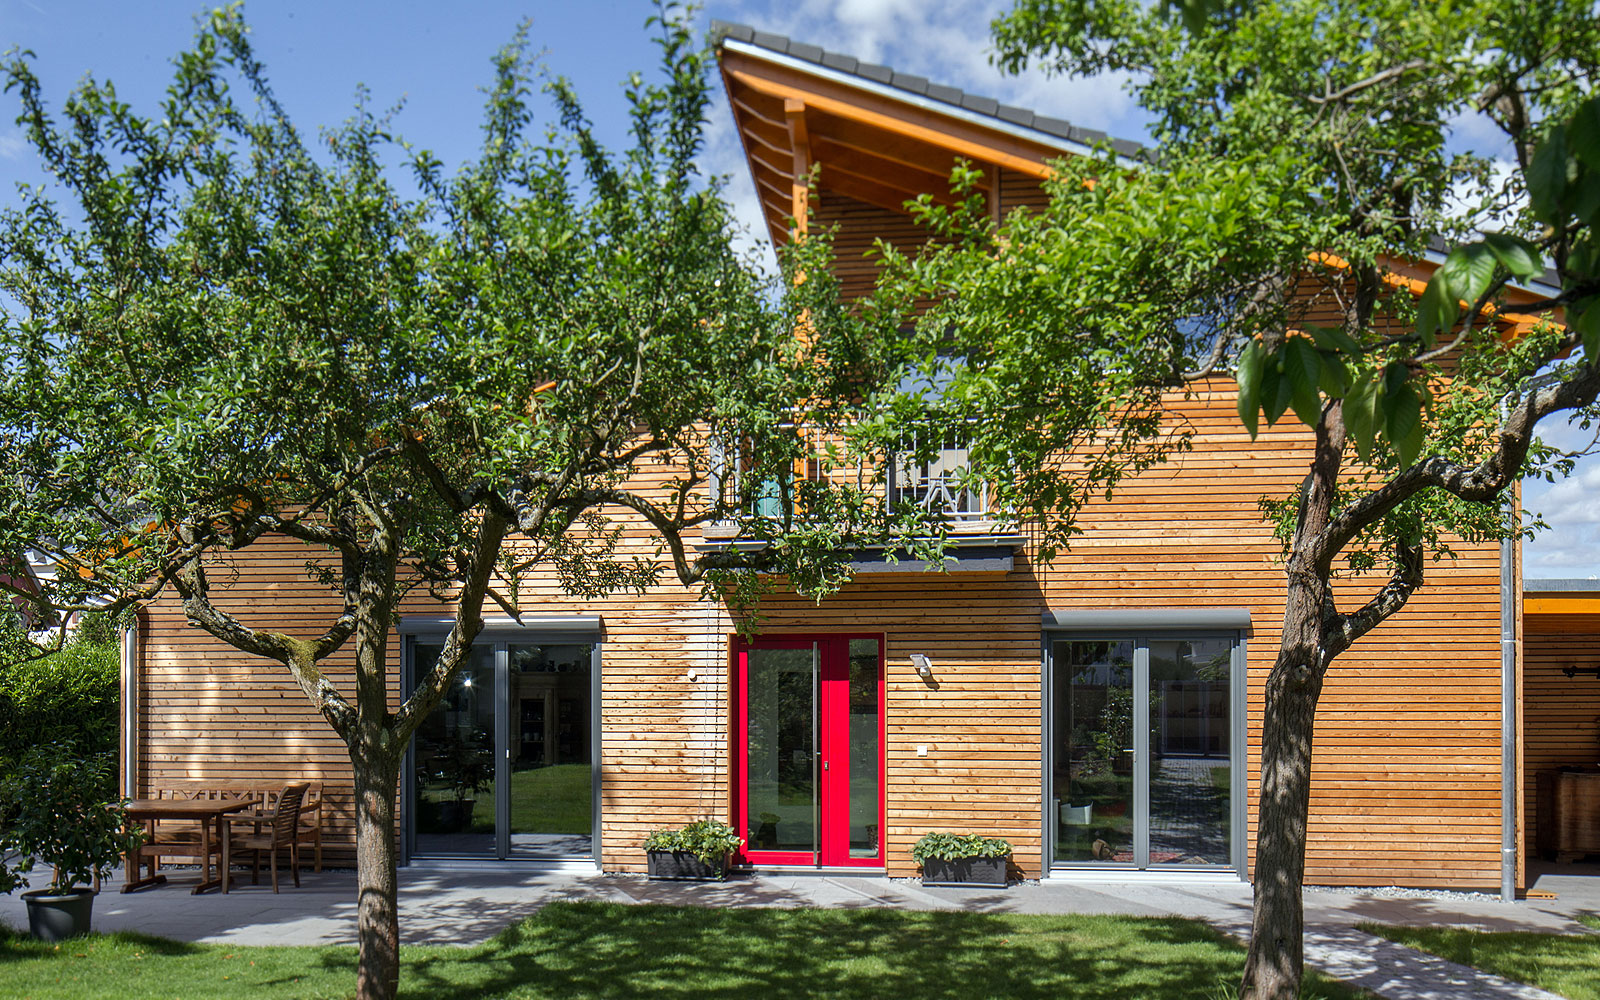 From efficiency to passive house